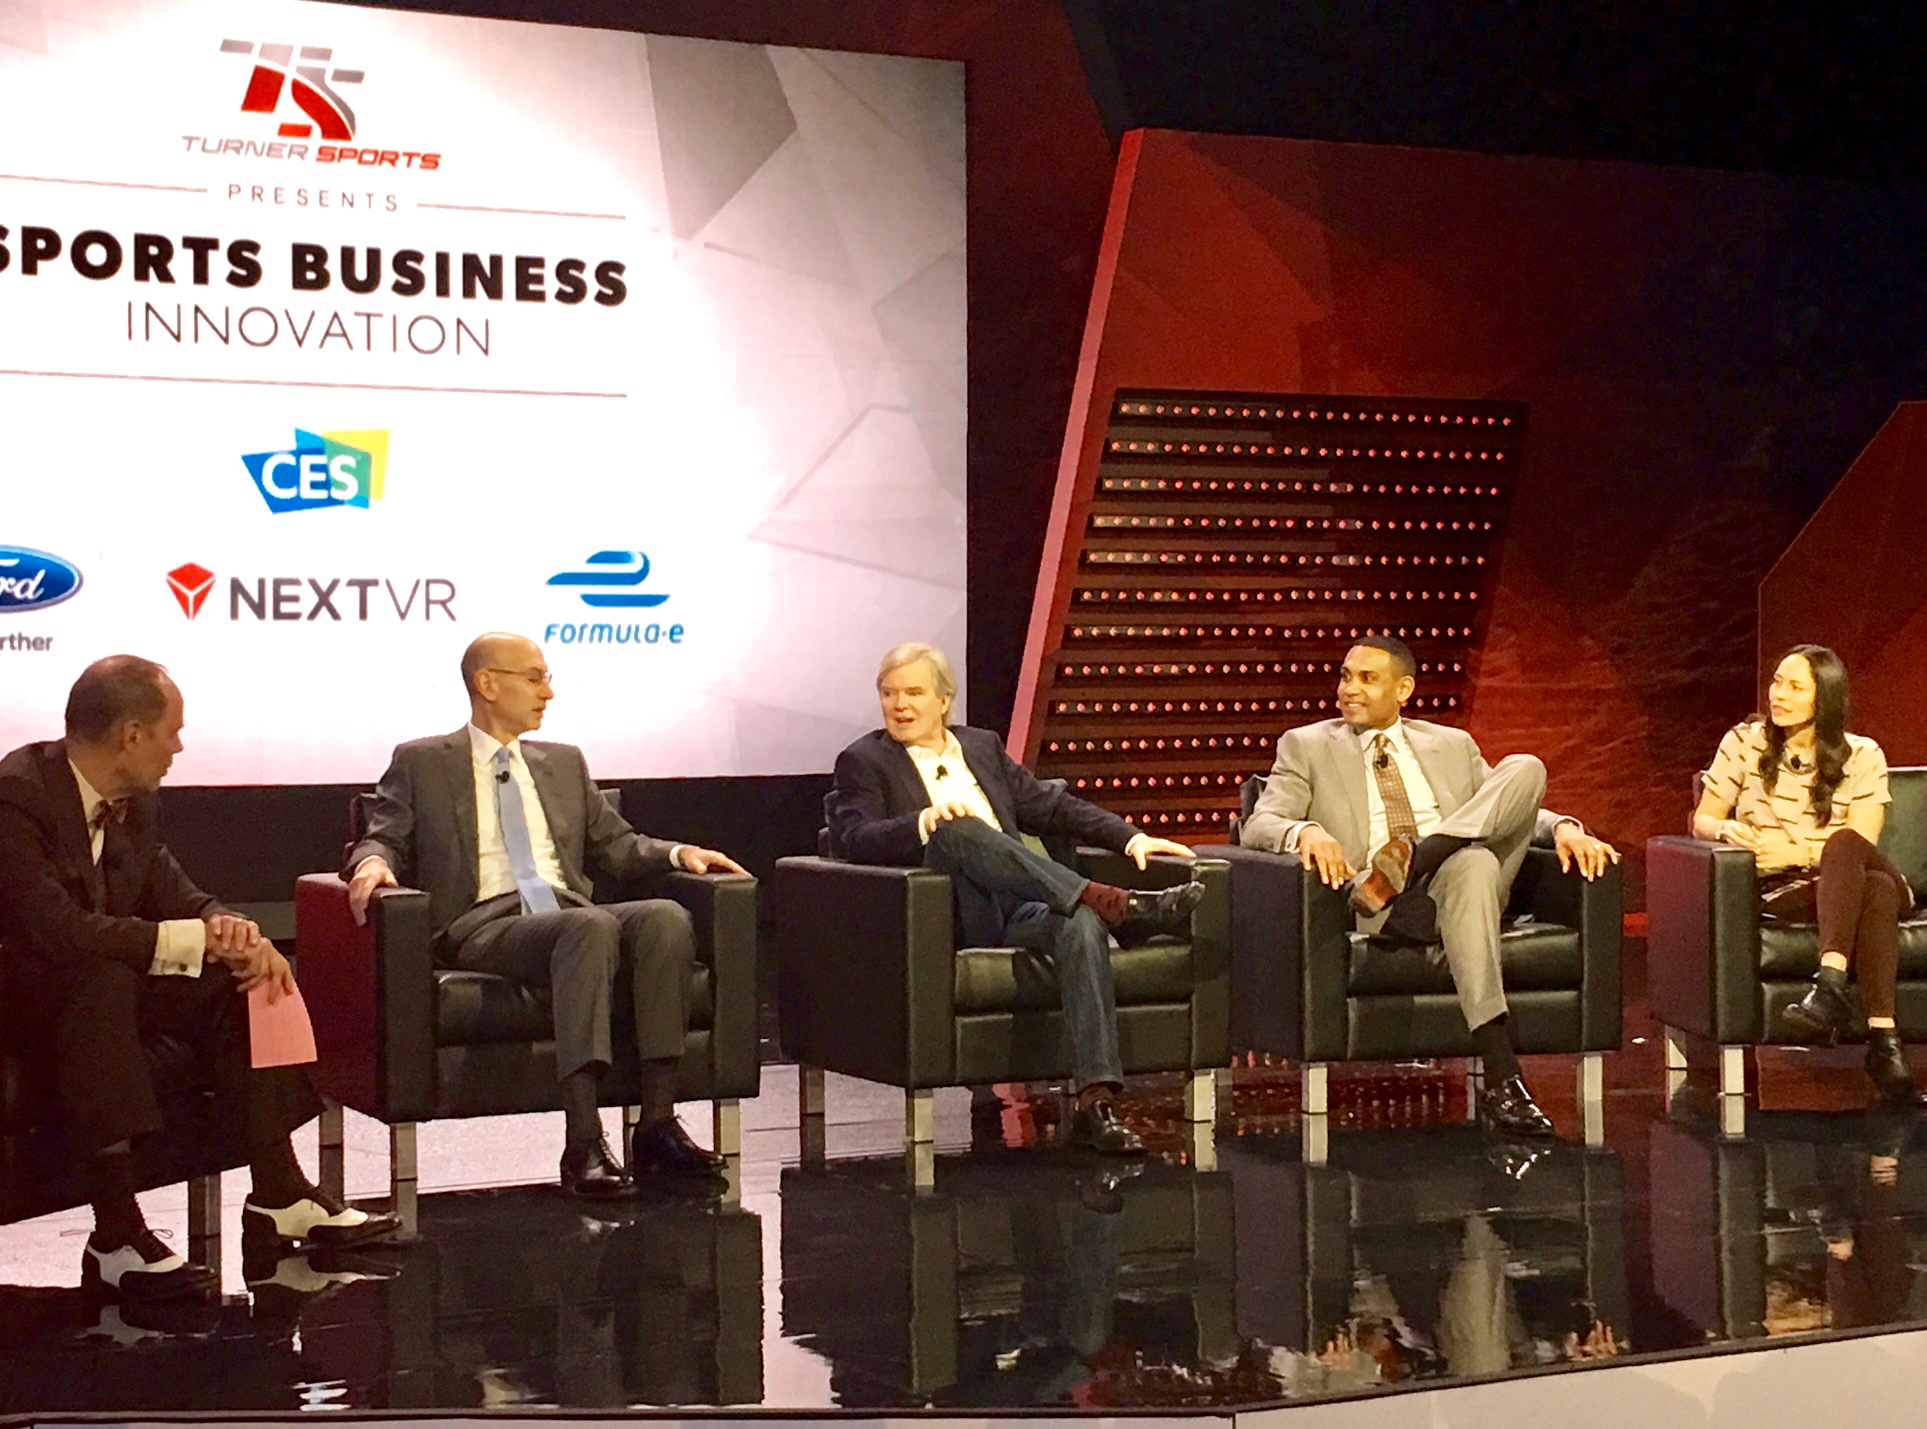 TNT's Ernie Johnson (left) moderated a panel that discussed social media and more at CES. It featured (l-to-r) Adam Silver of the NBA, Dr. Mark Emmert of the NCAA, Grant Hill of TNT/NBA TV, and Sue Bird of the Seattle Storm.